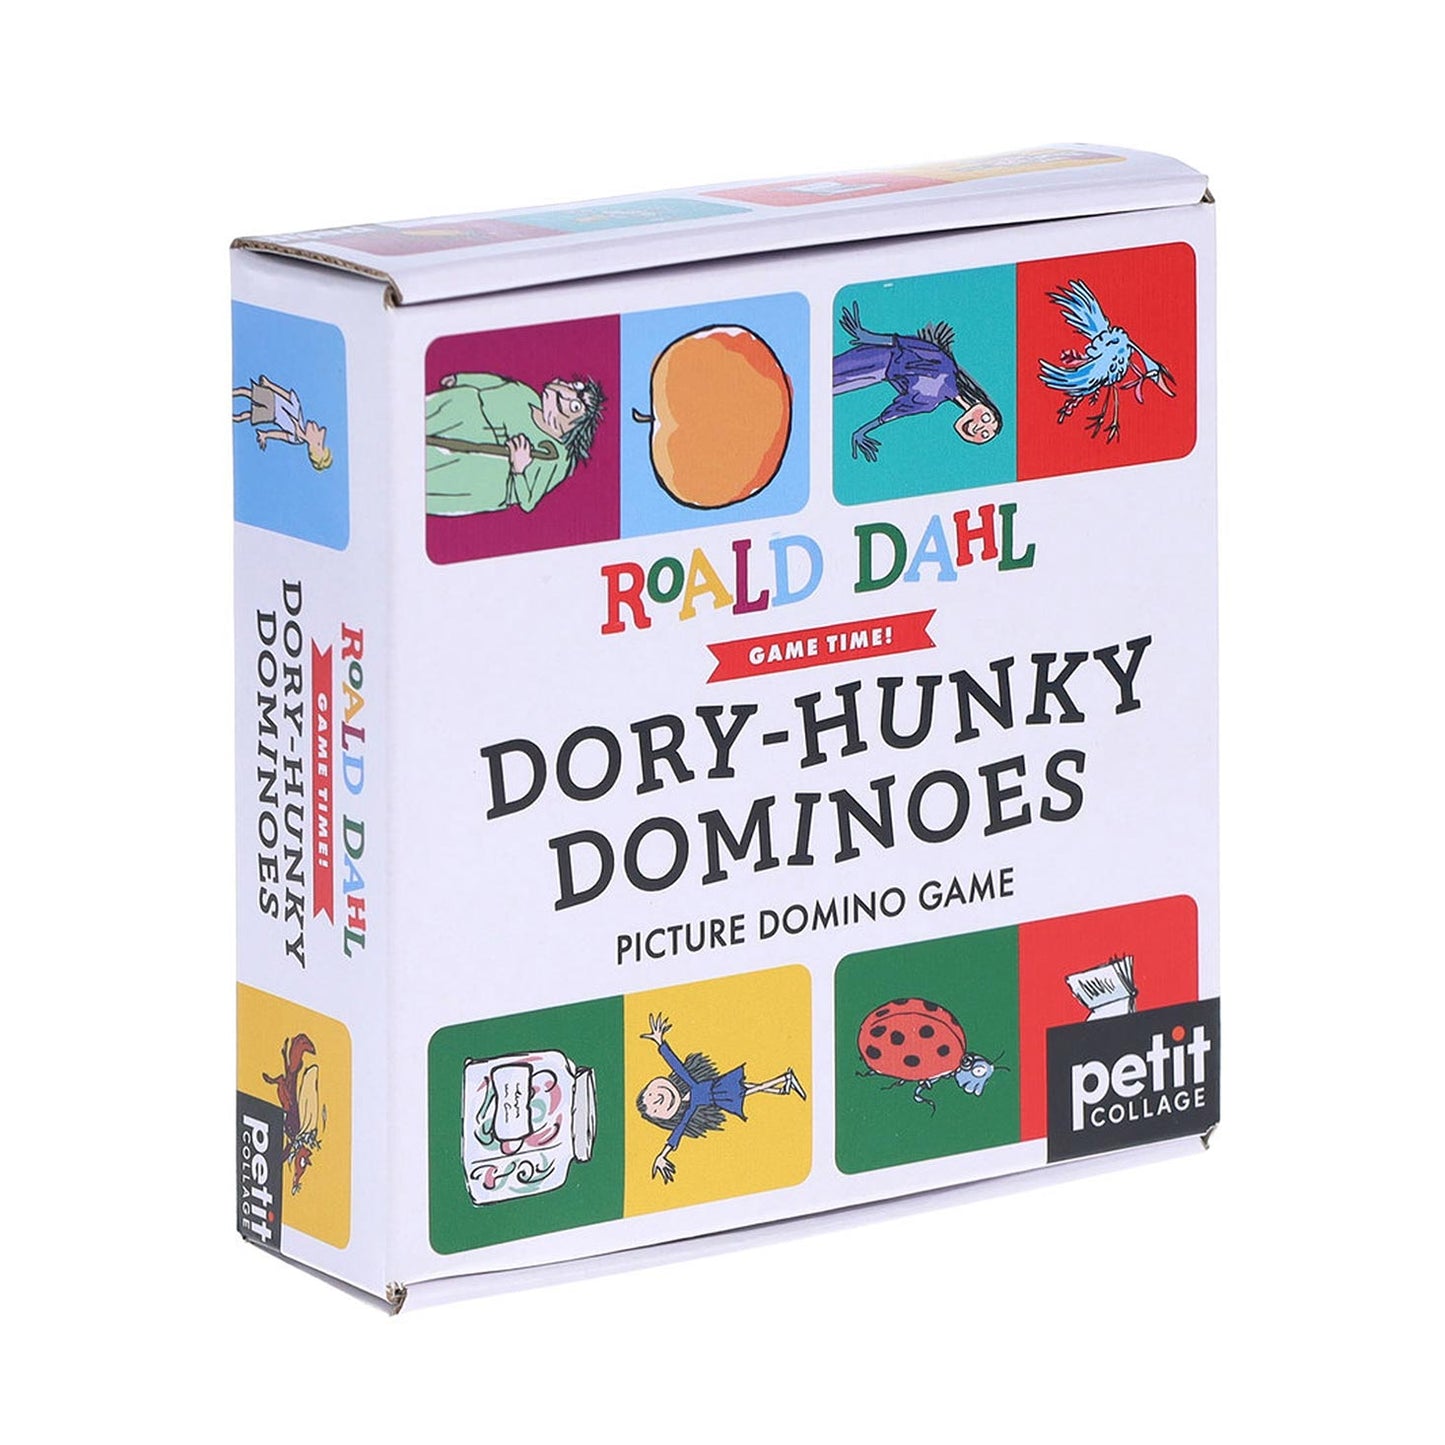 Dory-Hunky Dominoes game from Roald Dahl and Quentin Blake